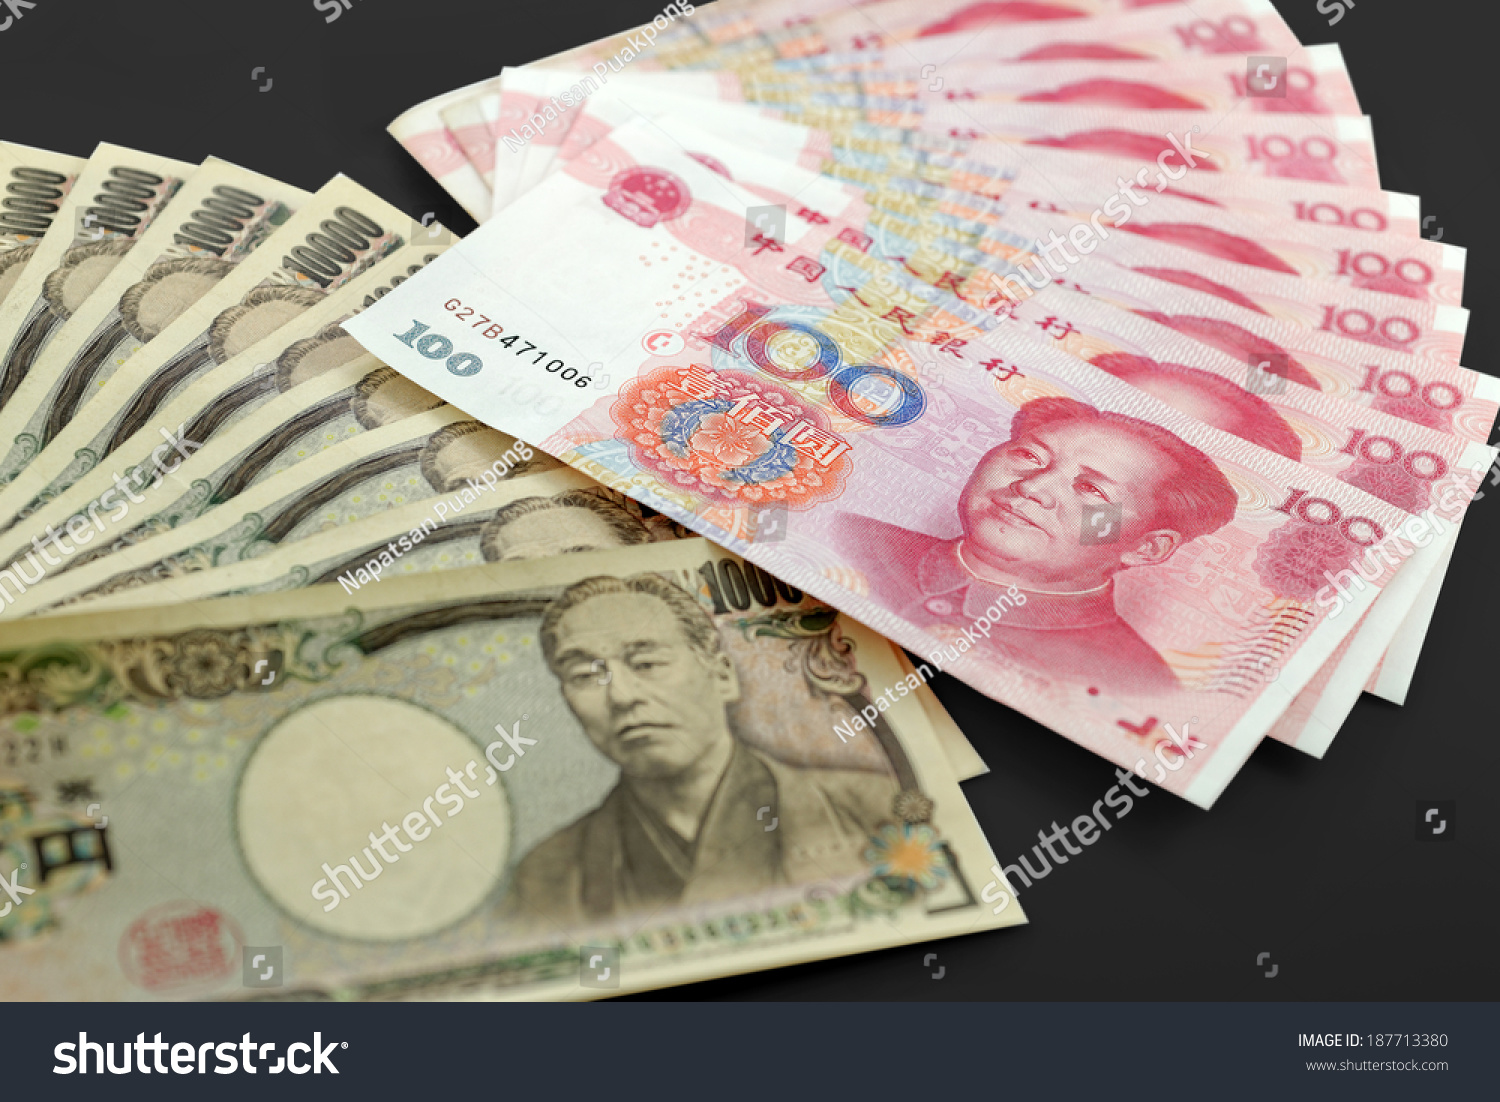 Forex currency pair stock image